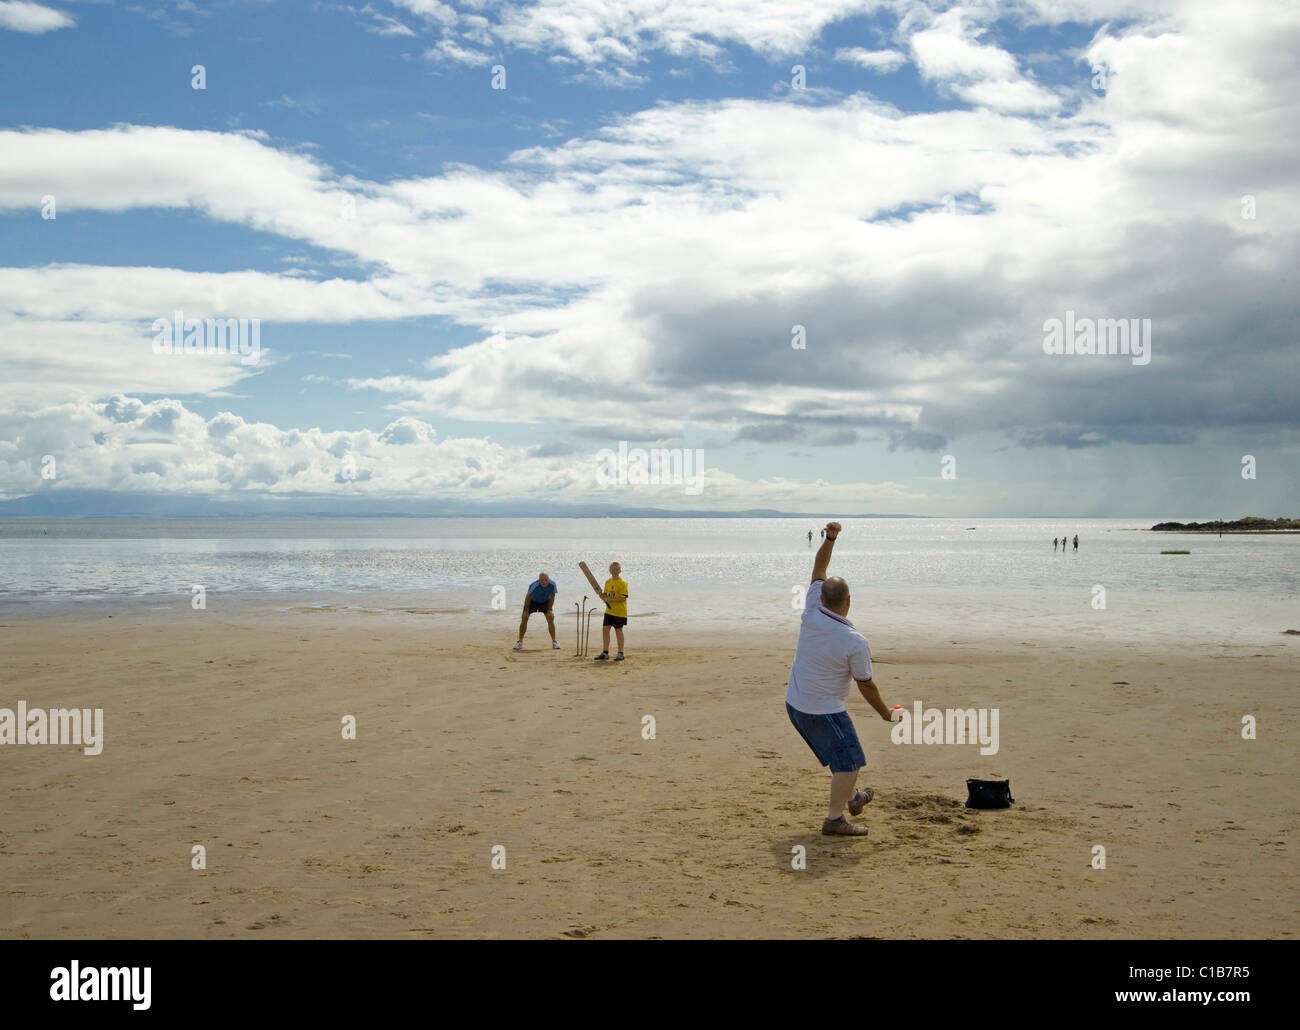 Playing cricket on beach at Sandyhills, galloway with homemade wickets Stock Photo